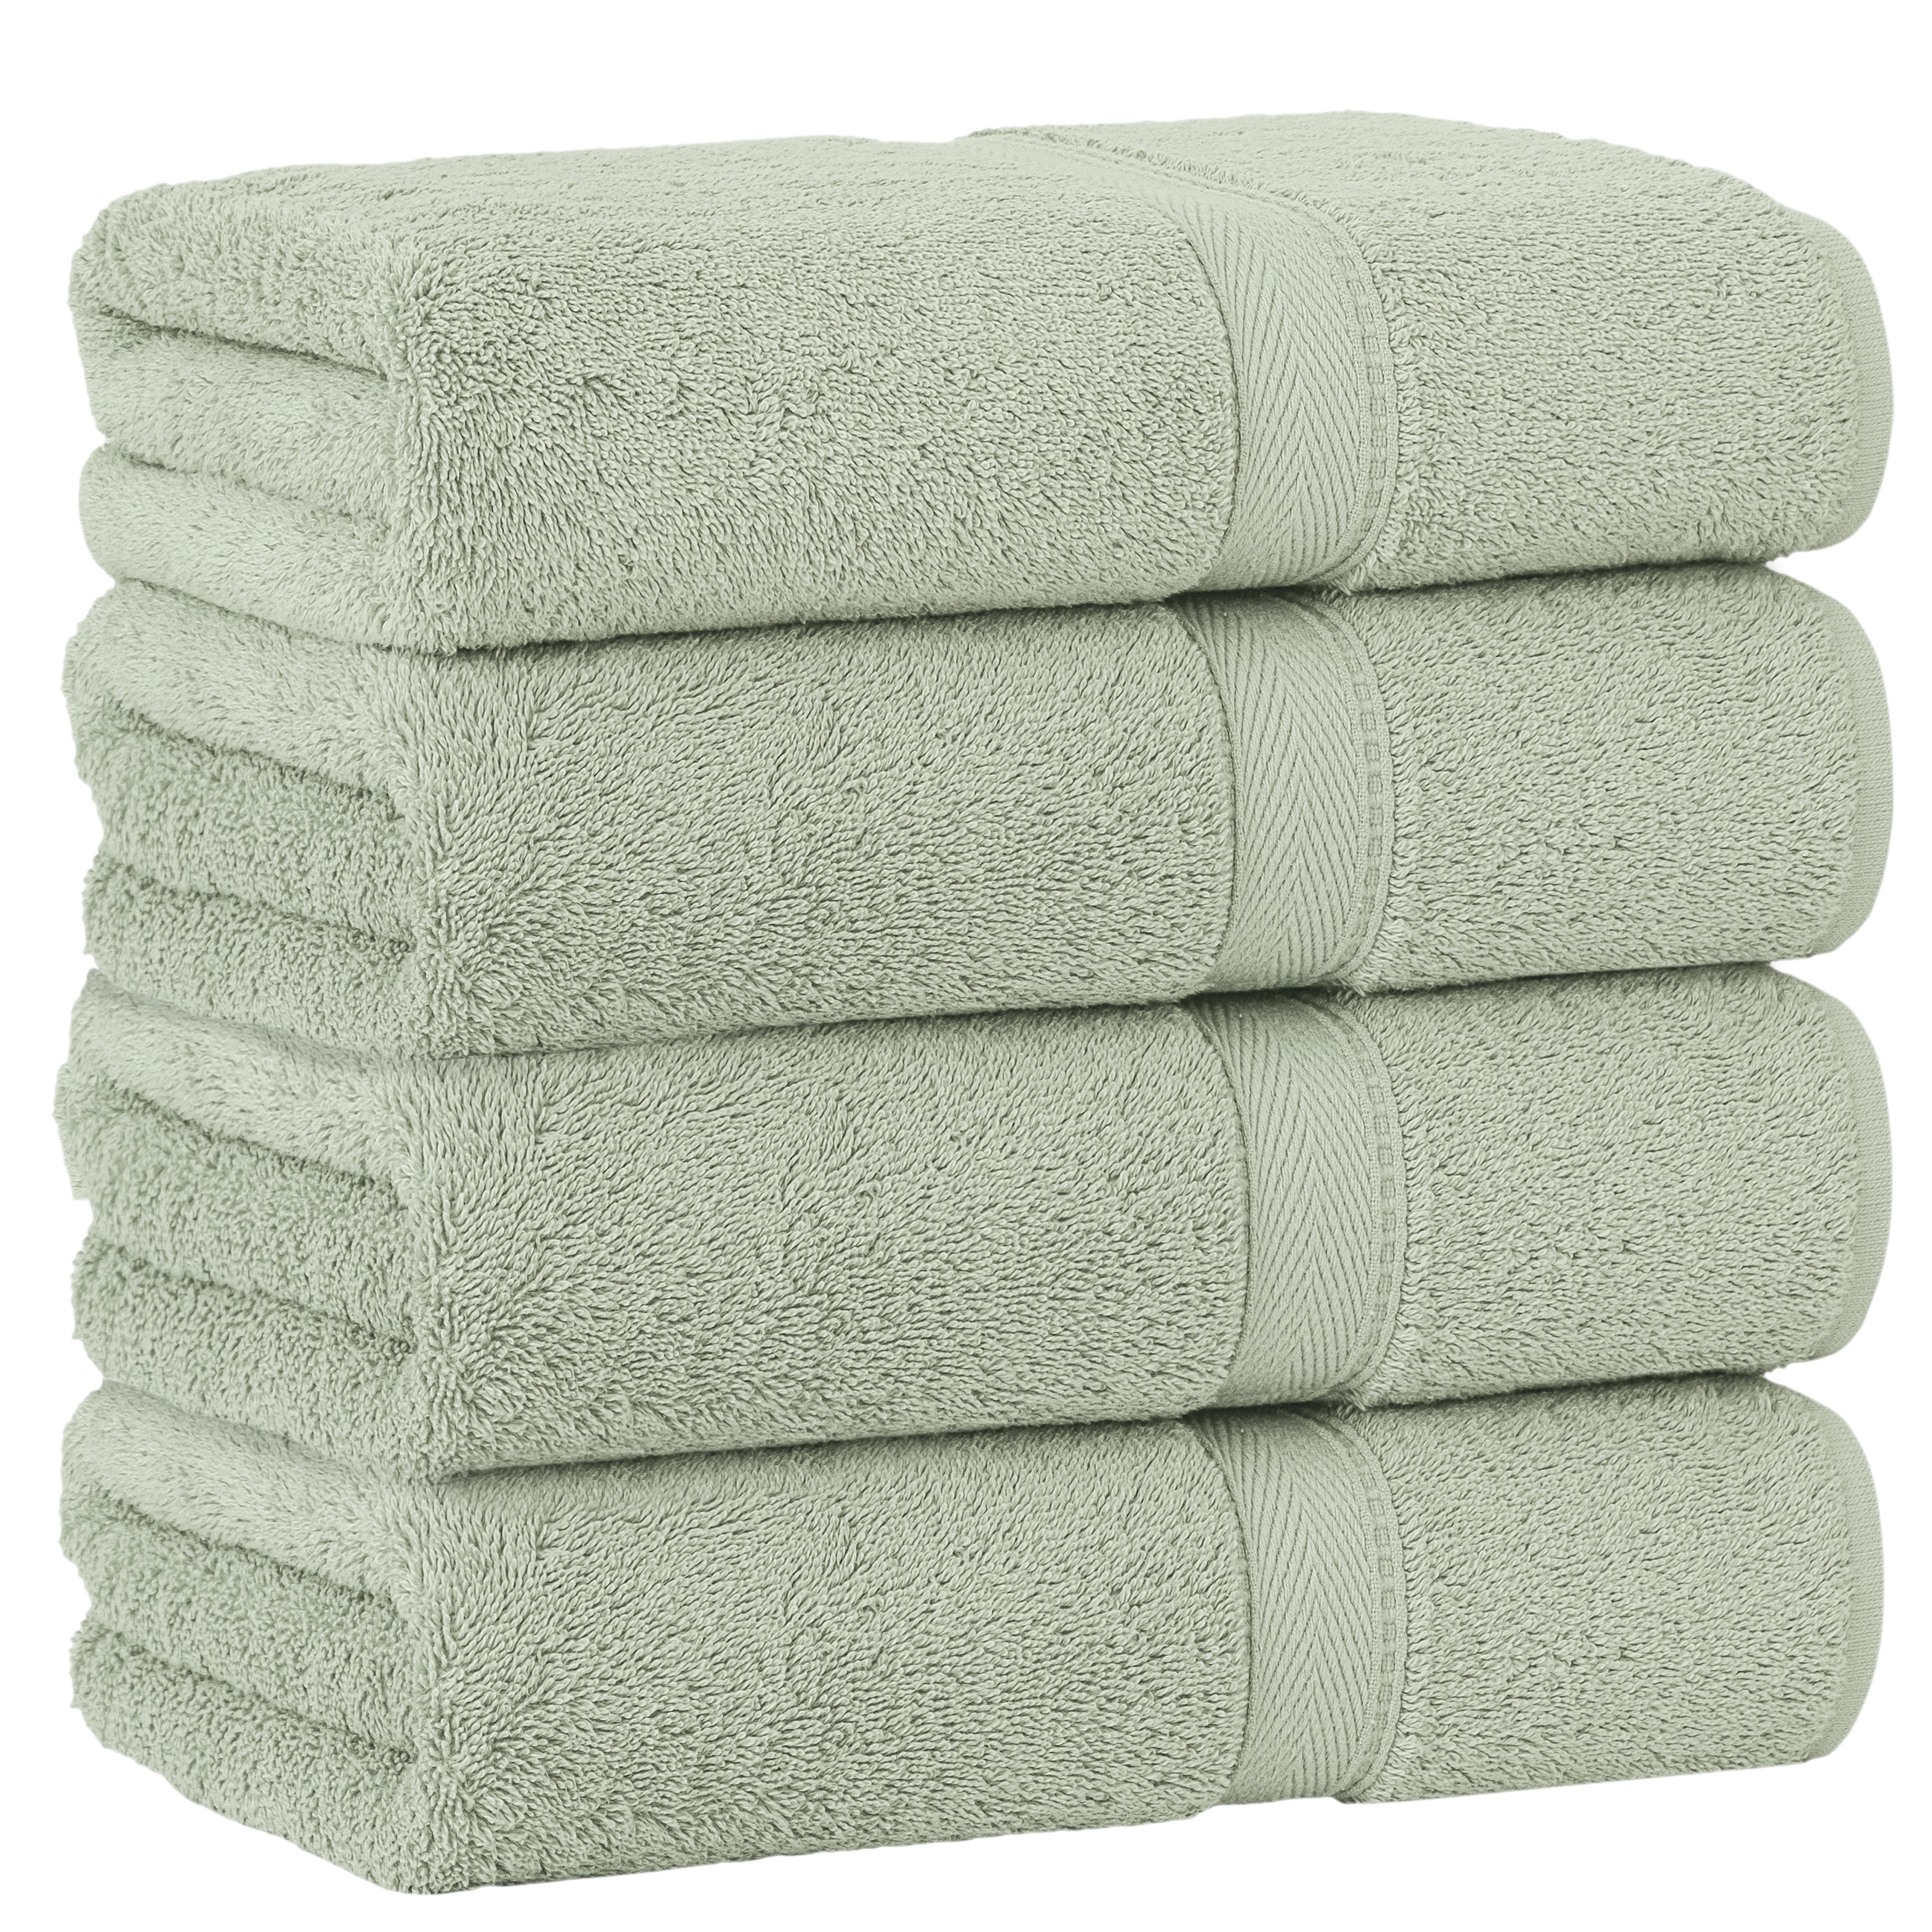 Royal Bedsheet & Towels - Hotel Quality Bath Towel 27'' x 54'' Colors are  Black, Beige, Brown, Grey, Green and Hotel White Made in Pakistan 100%  ringspun cotton terry for gentle and